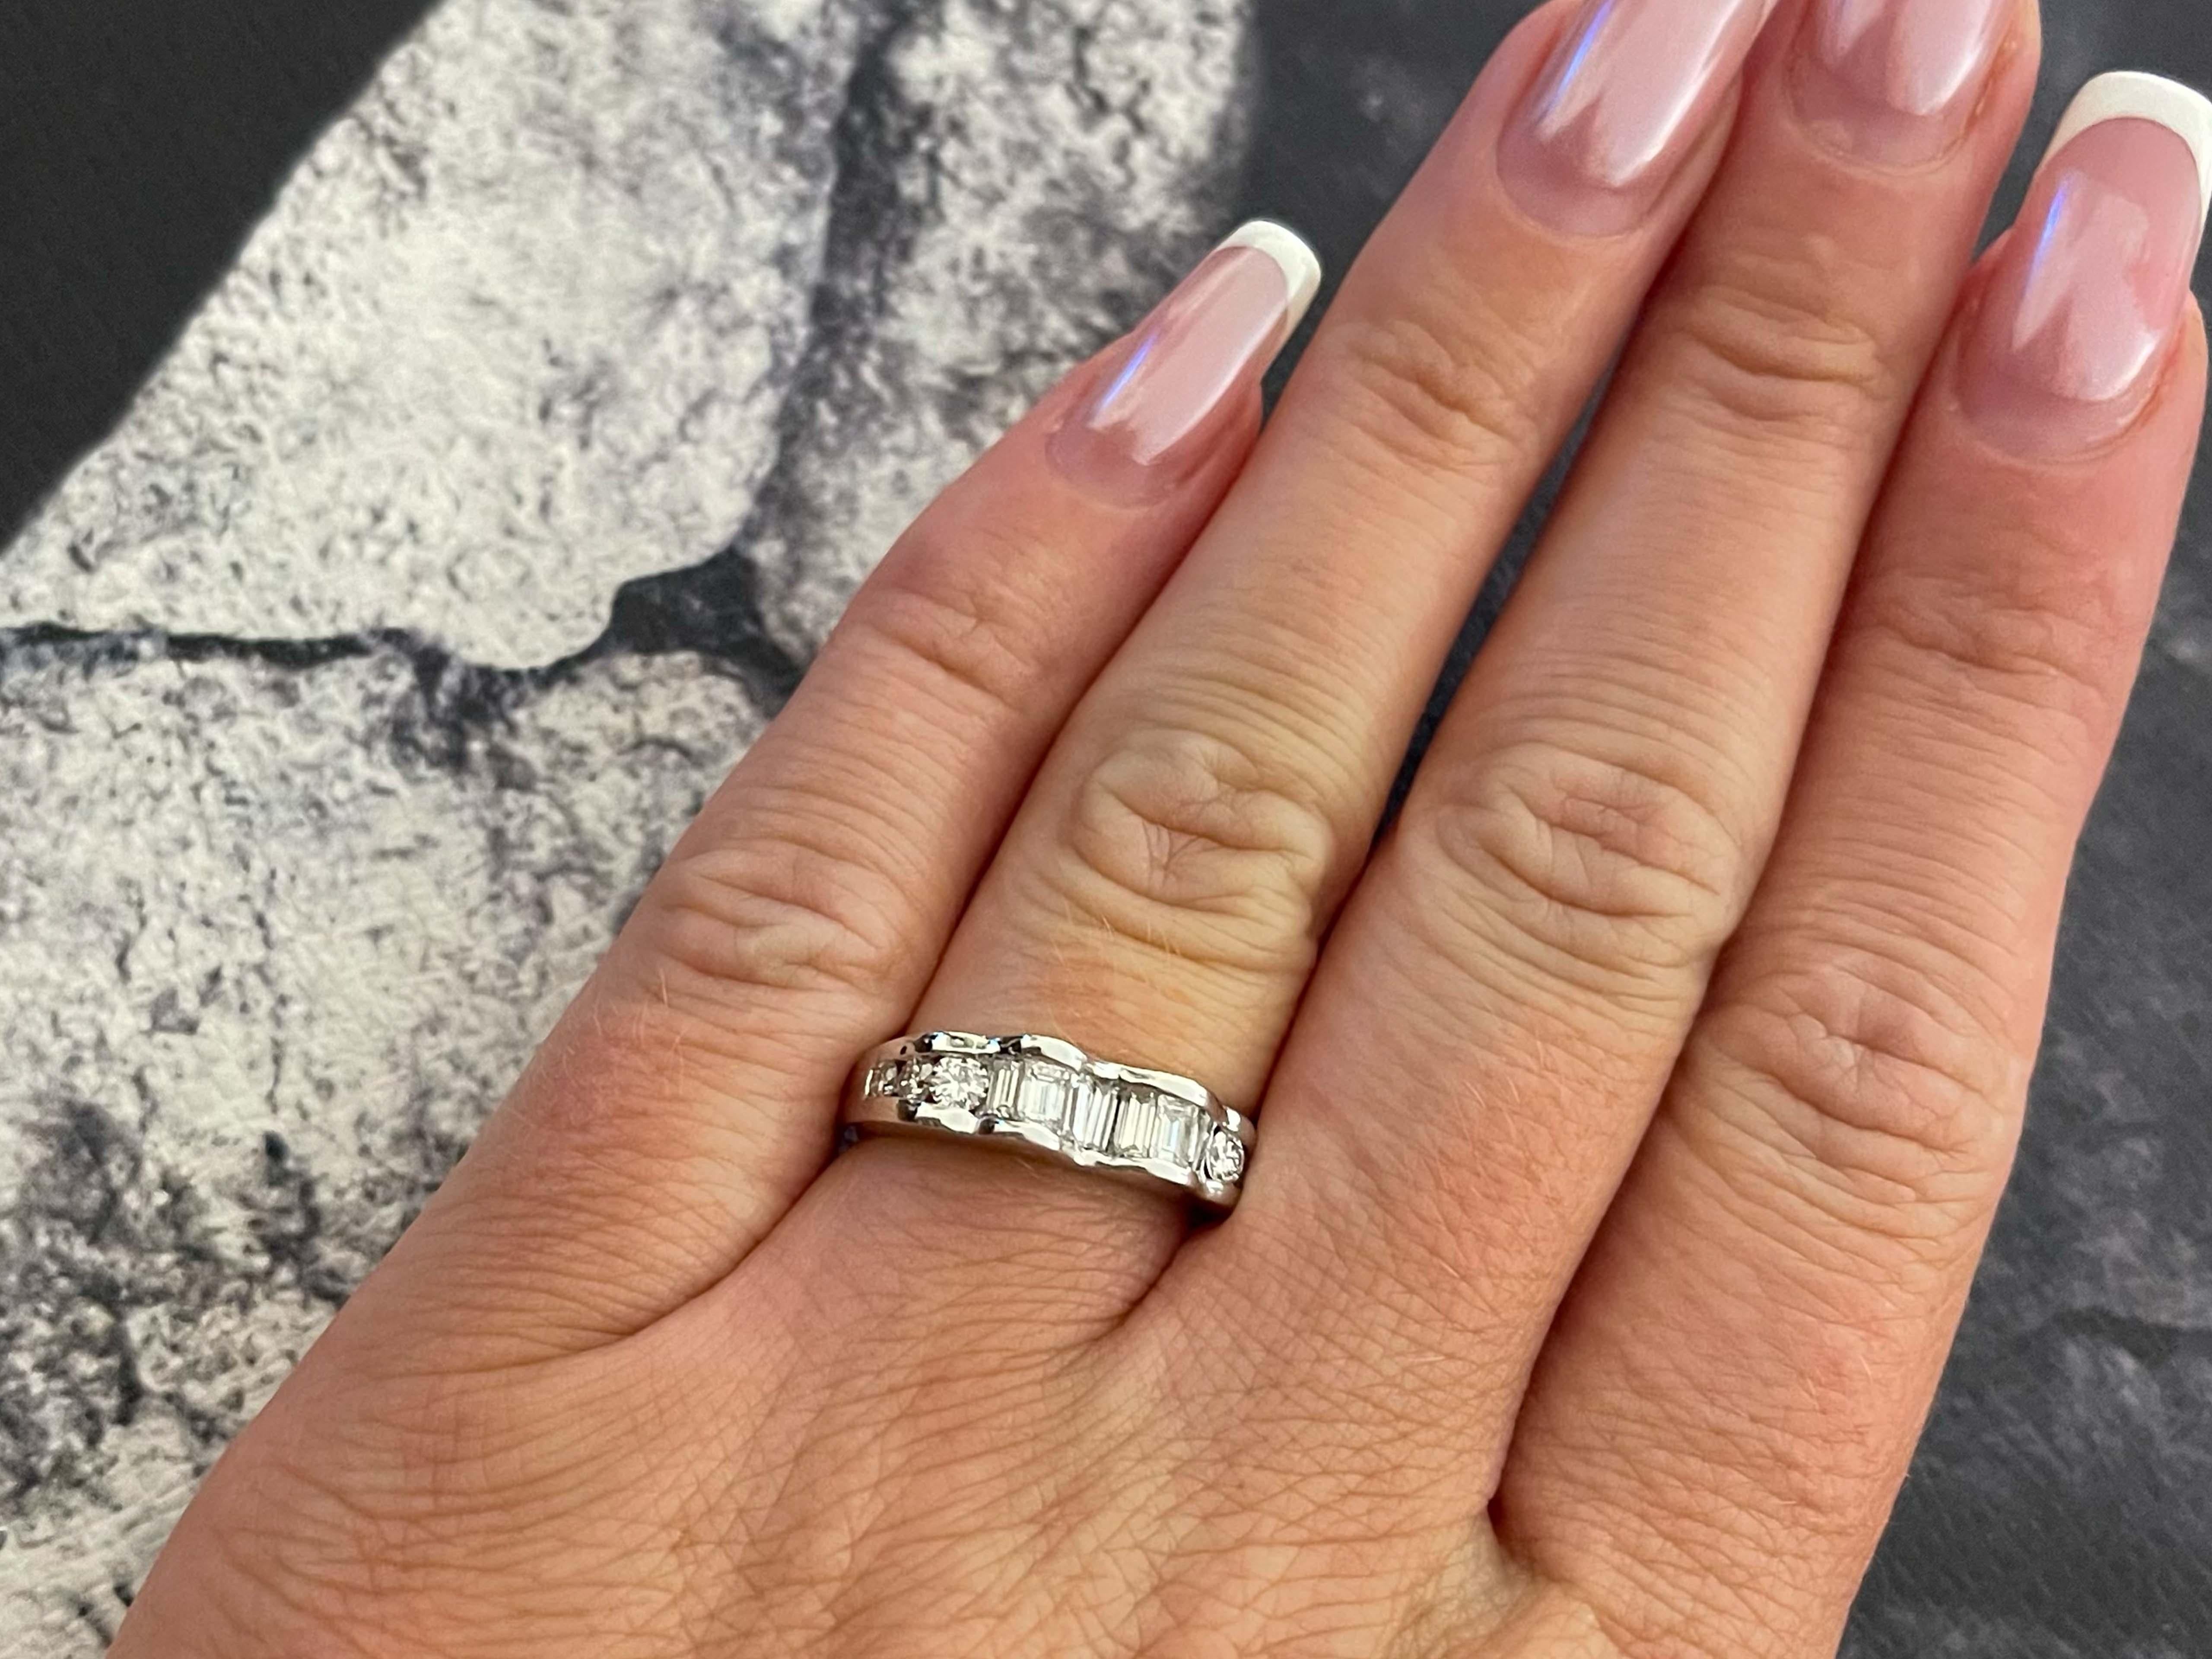 Item Specifications:

Metal: 18k White Gold 

Diamond Count: 6 brilliant cut, 7 baguette
Diamond Carat Weight: ~0.55 carats

Diamond Color: G-H

Diamond Clarity: VS2-SI1

Ring Size: 6 (resizable)

Total Weight: 5.0 grams

Stamped: 